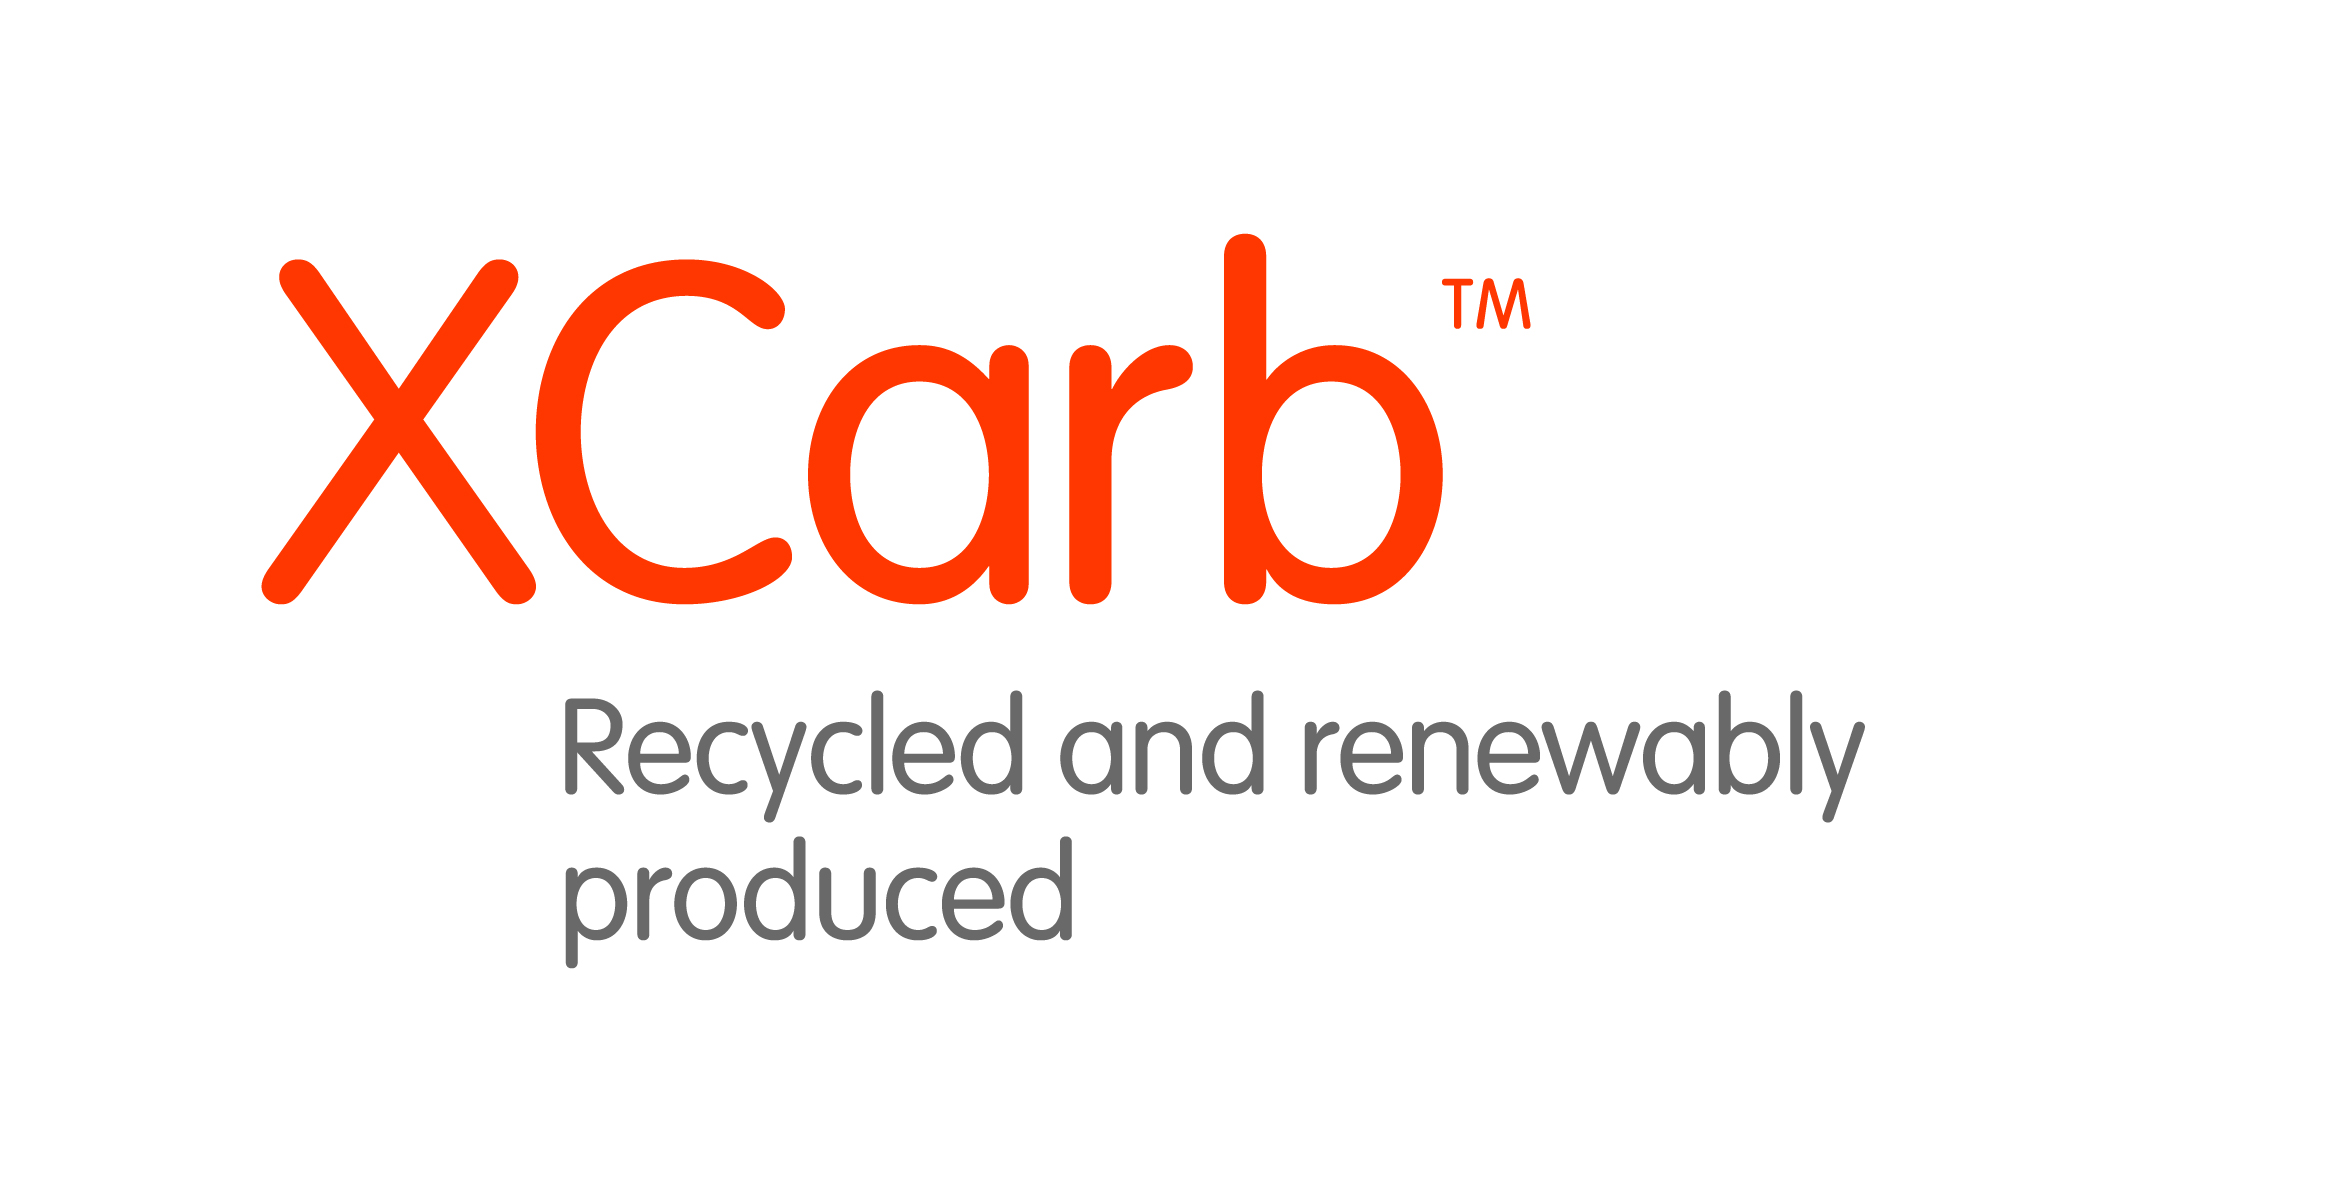 XCarb recycled and renewably produced logo